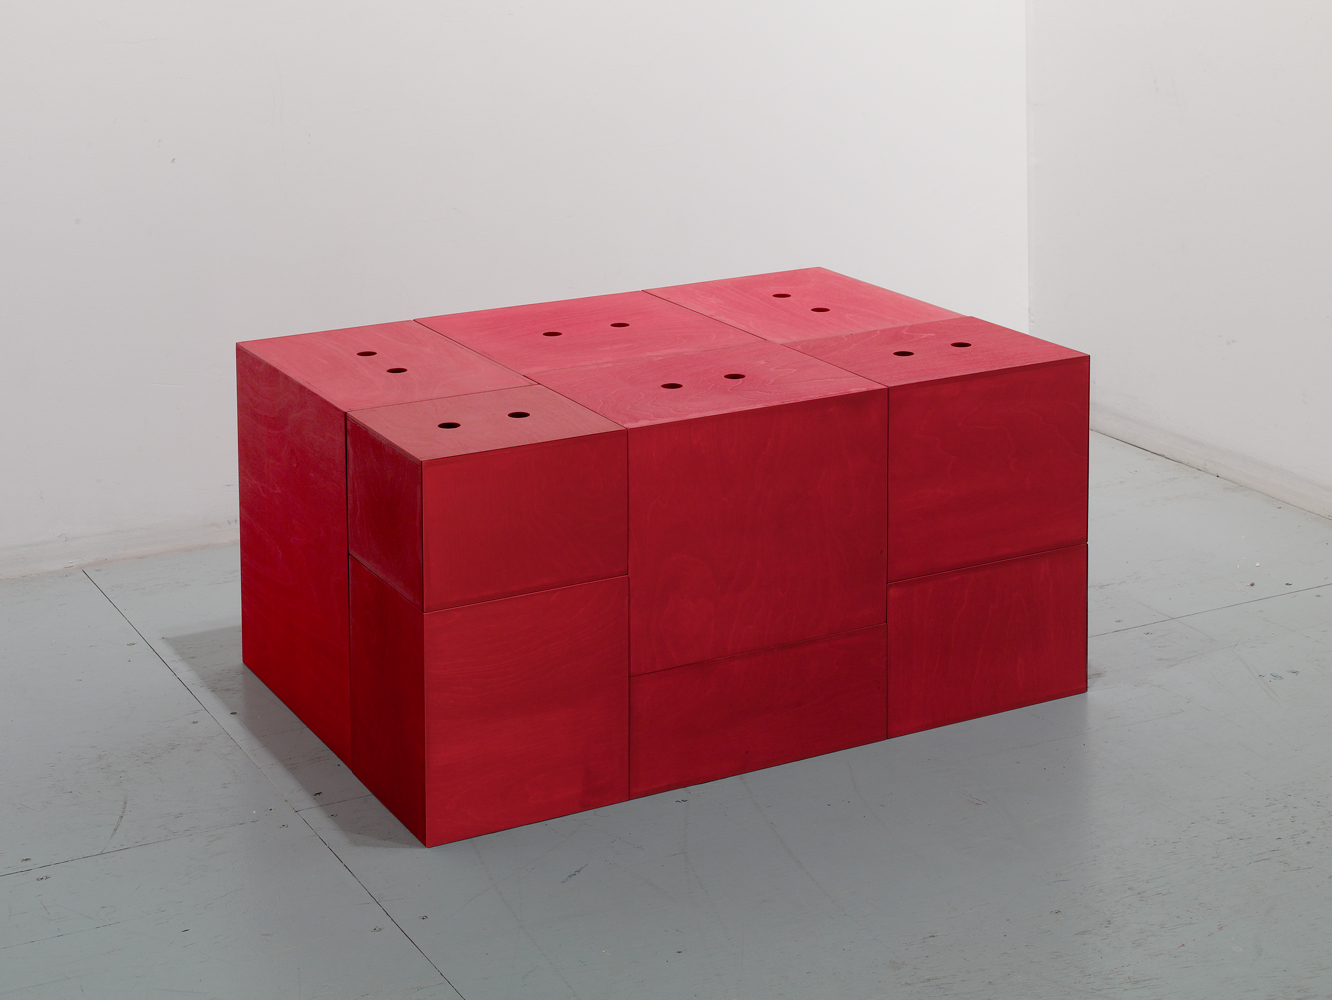 Kate Shepherd, 2008, Red-and-Untitled-Configurable-Boxes.jpg